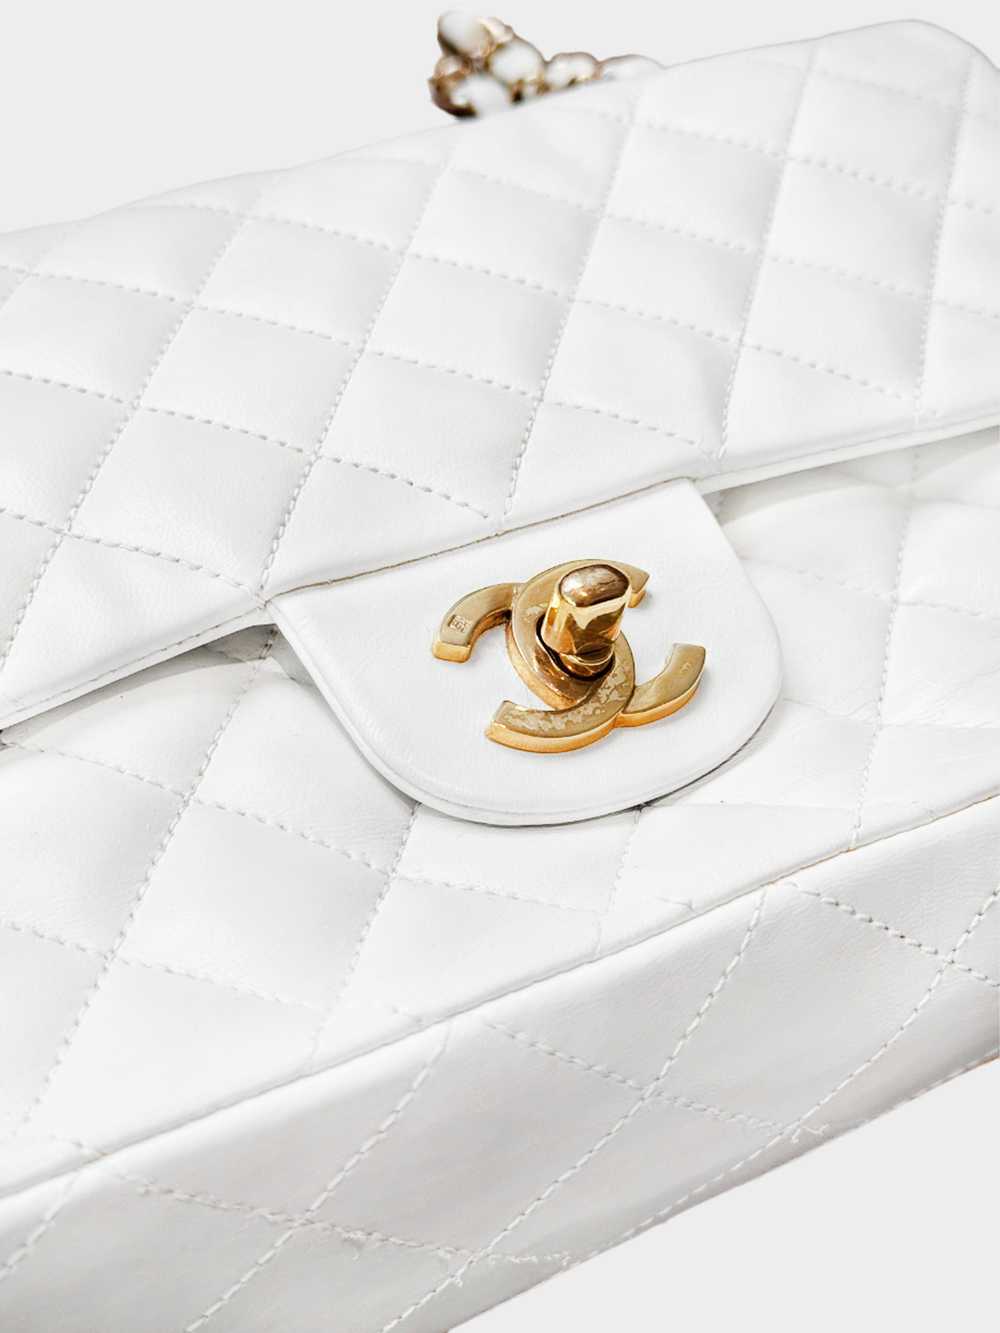 Chanel 2000s White Lambskin Leather Flap Bag - image 4